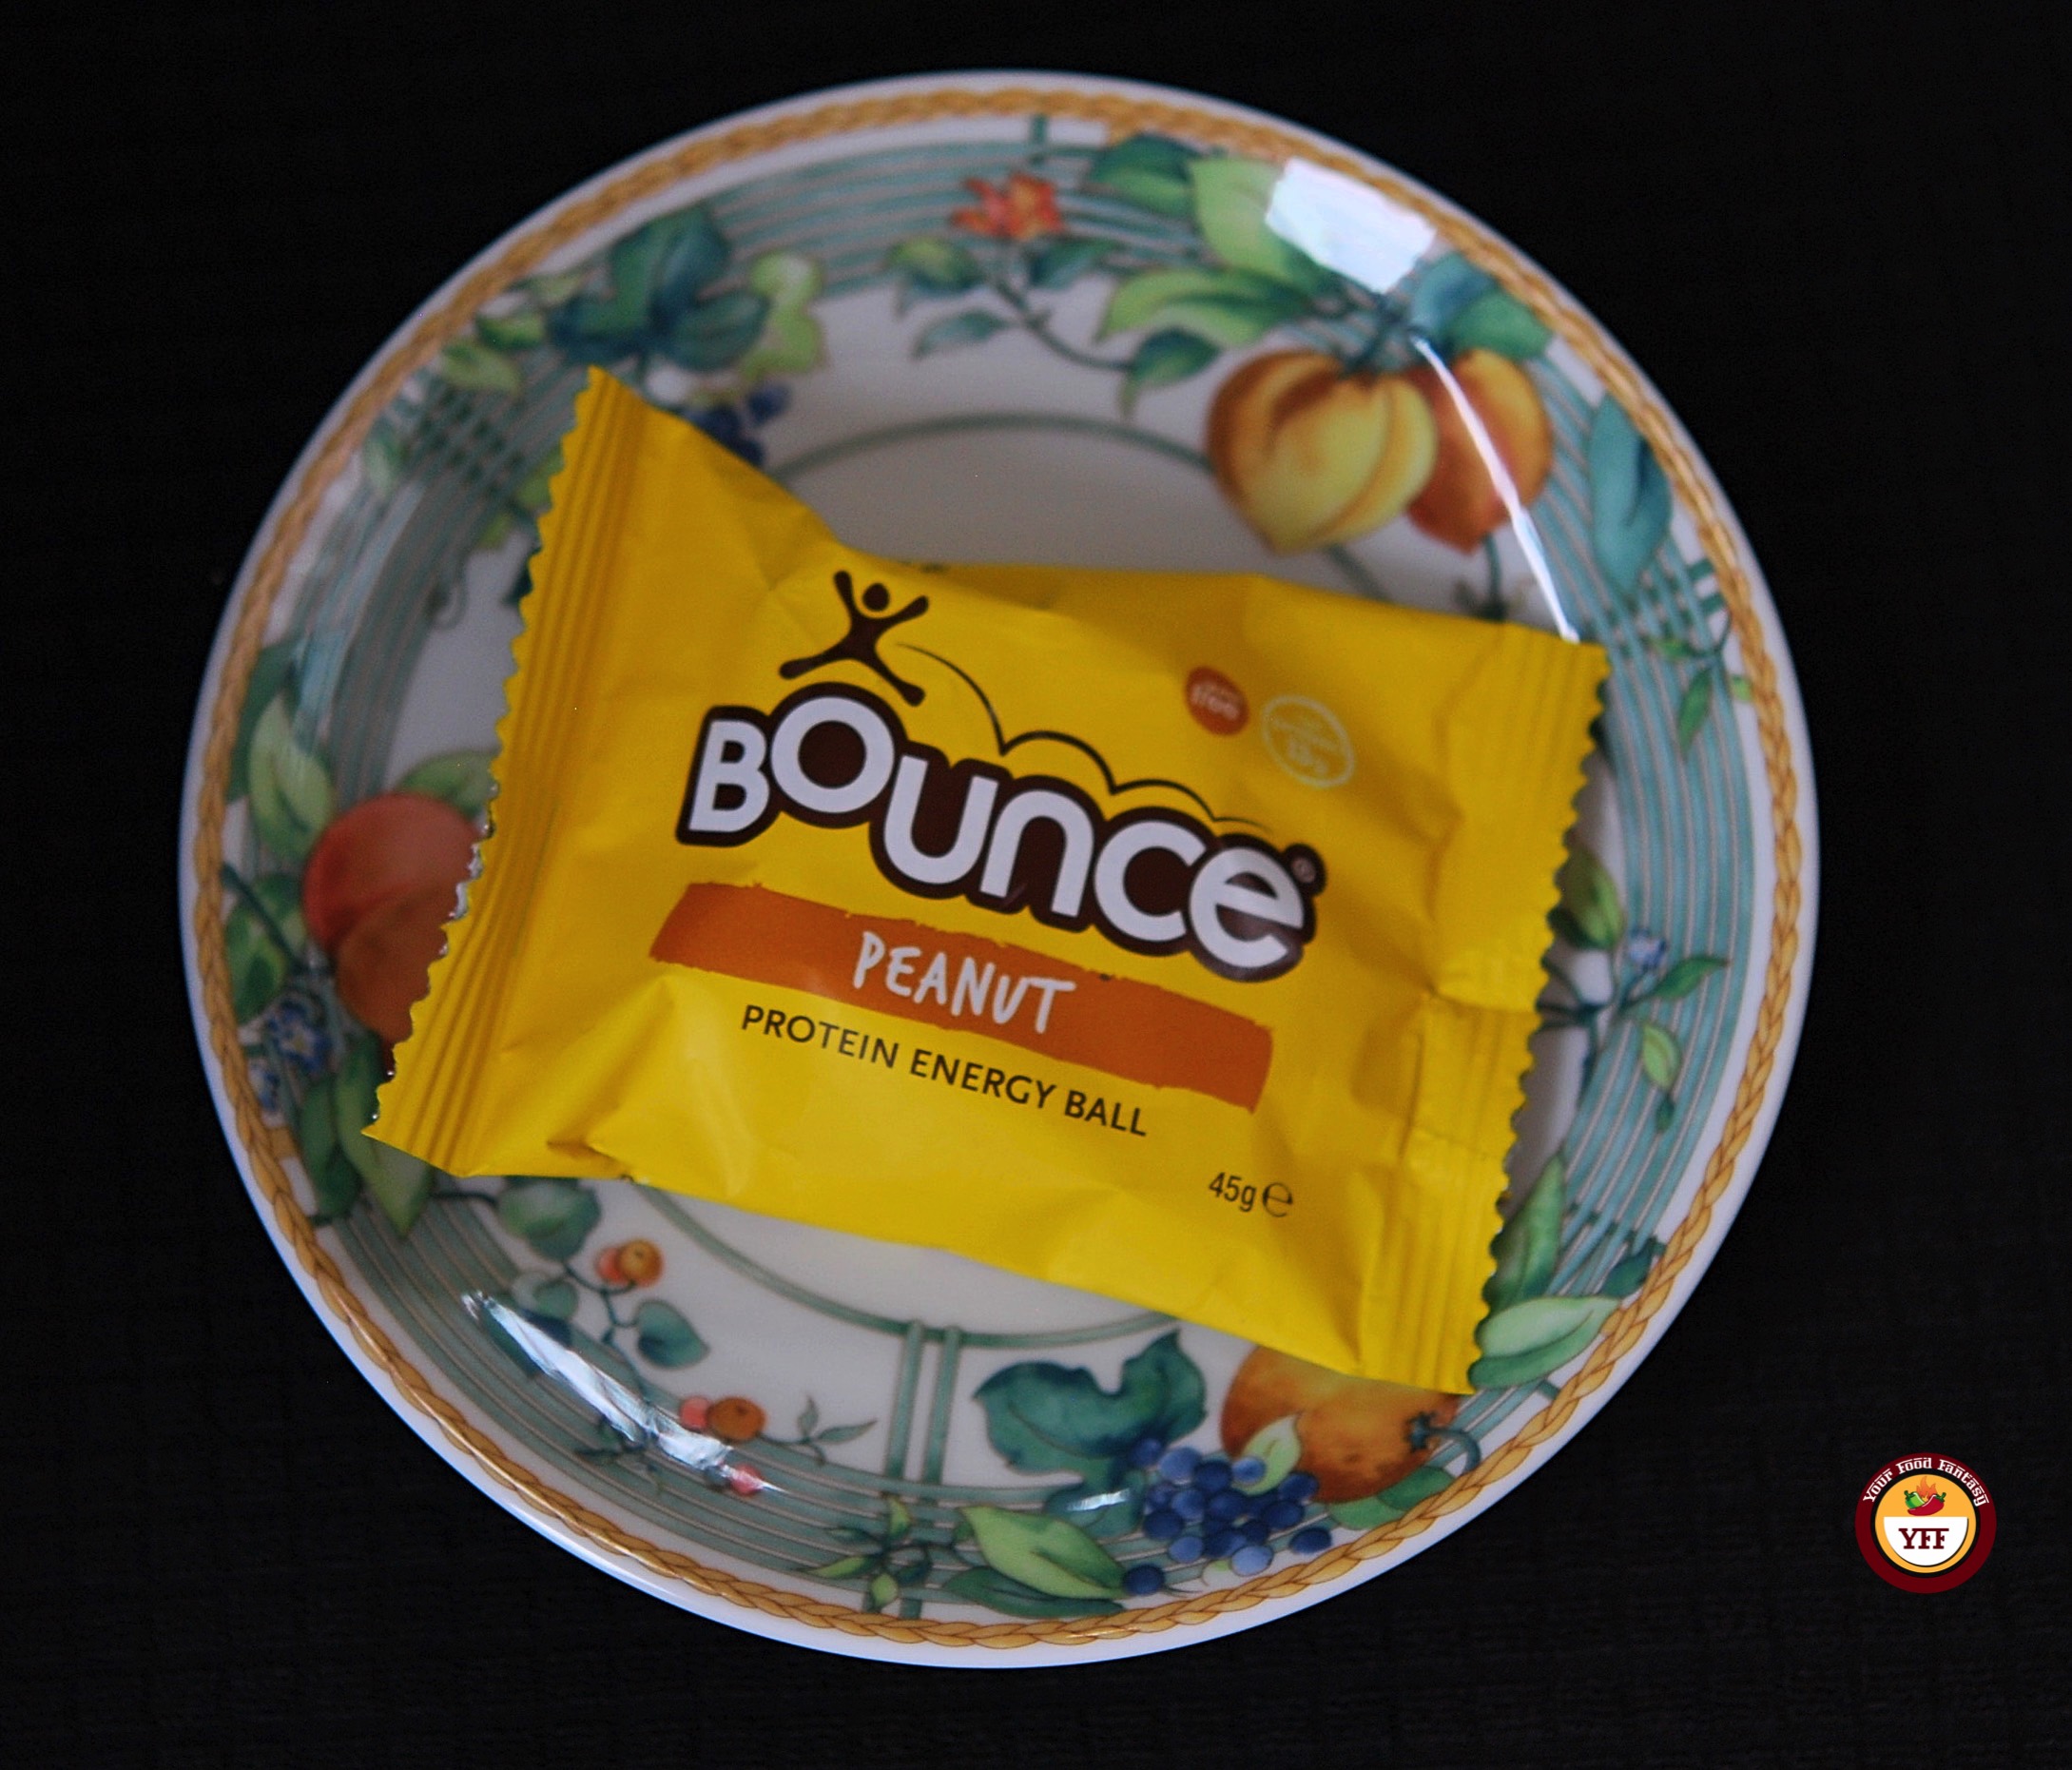 Bounce Protein Bar Review | Your Food Fantasy